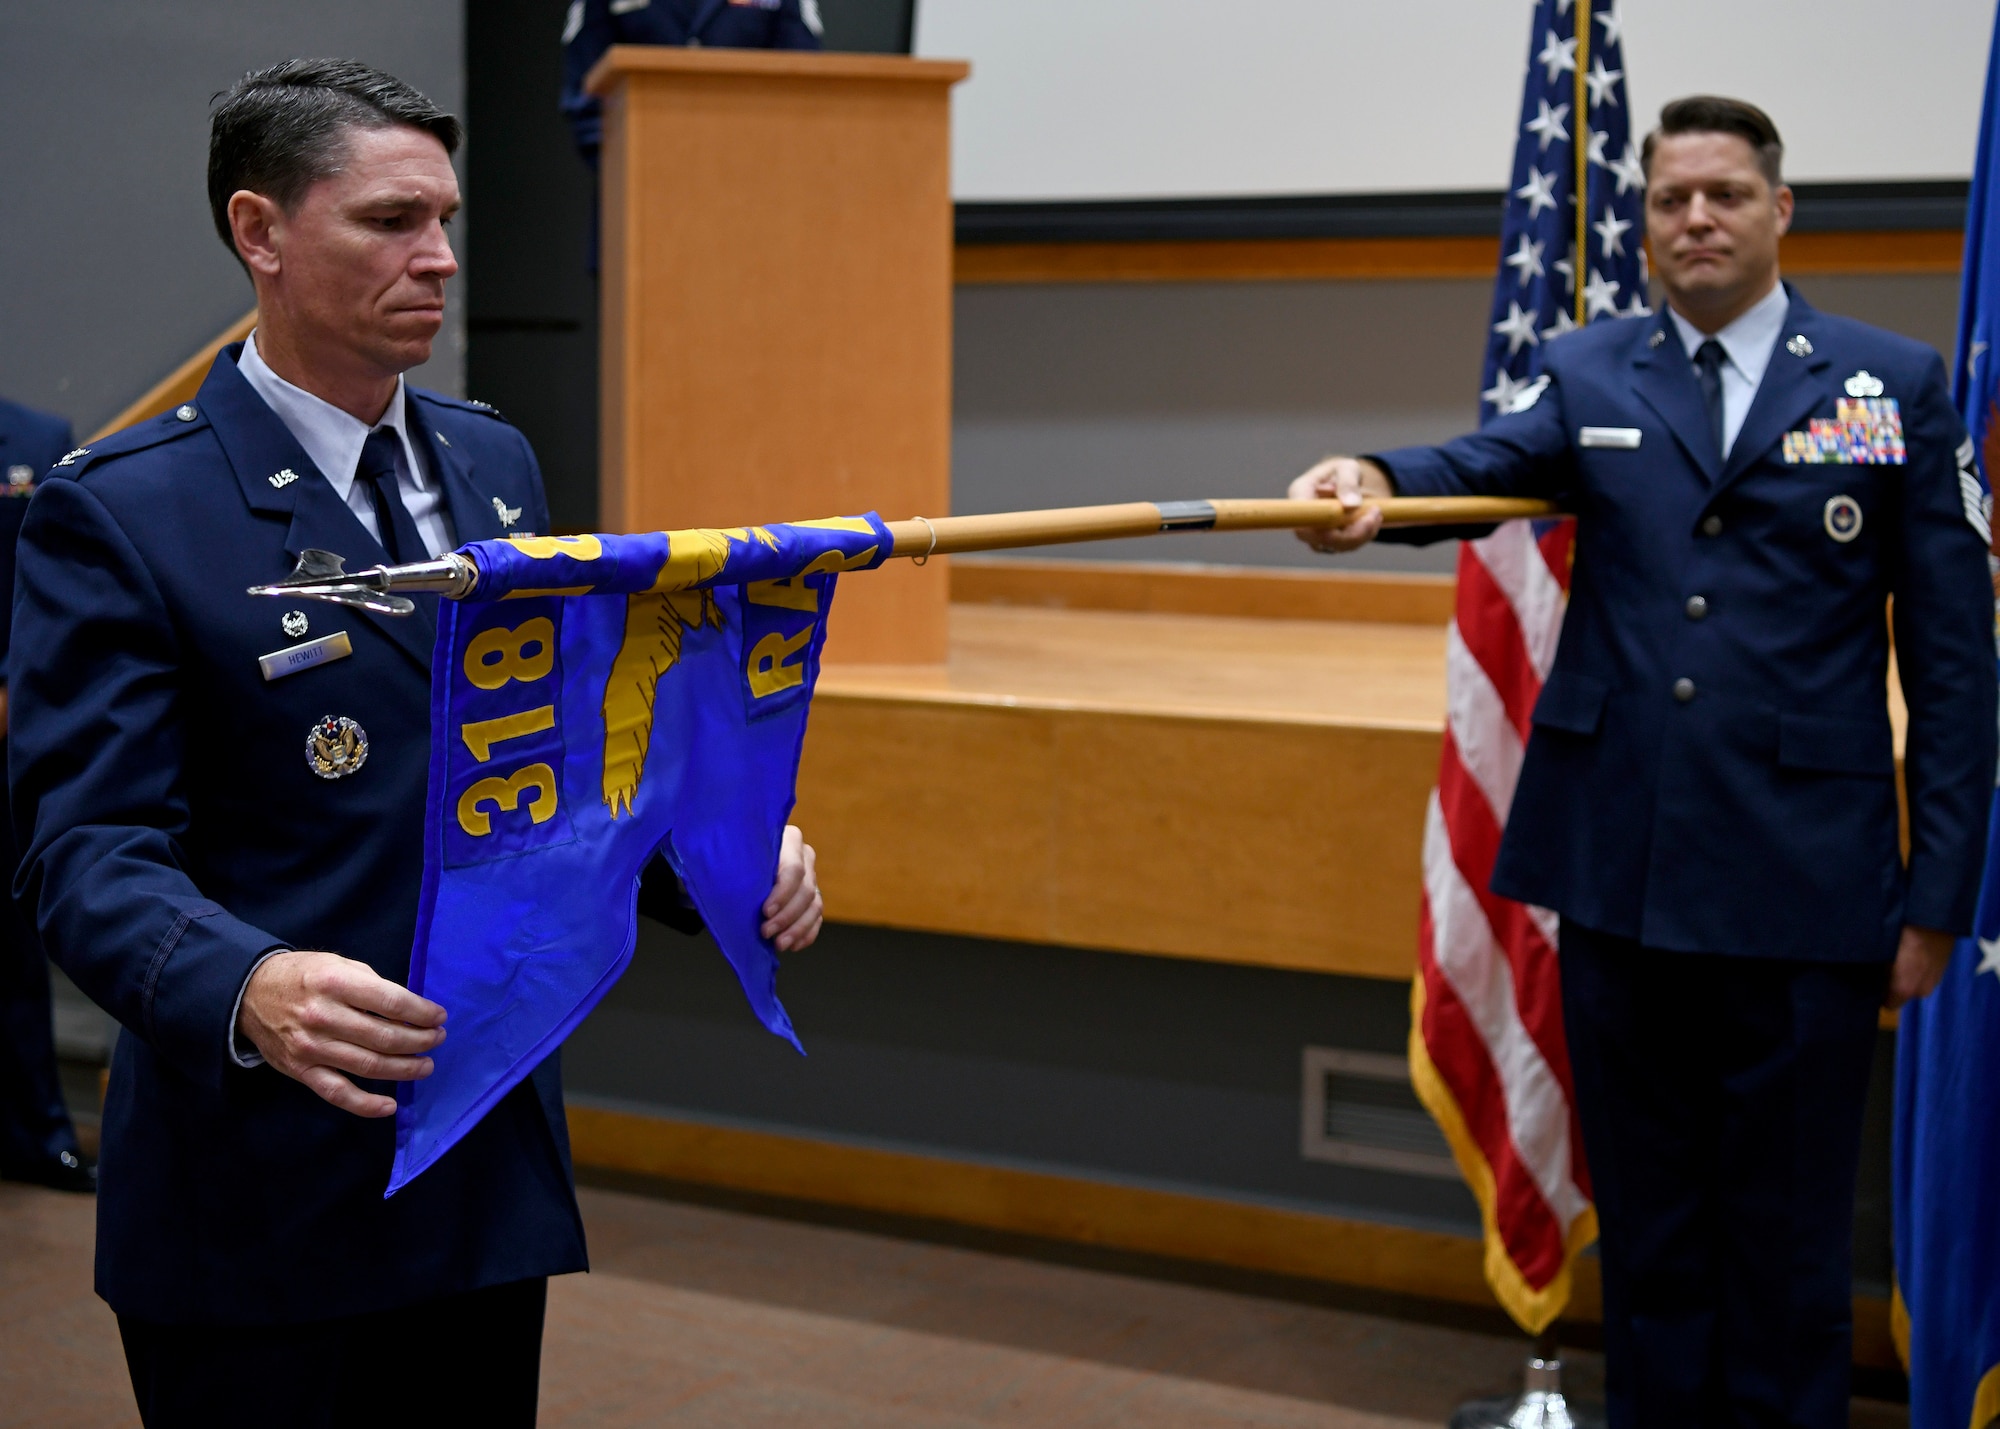 Col. James Hewitt, 318th Cyberspace Operations Group commander, unfurls the 318th Range Squadron guidon flag during the squadron’s activation ceremony at Joint Base San Antonio-Lackland, Texas, Oct. 1, 2019. Lt. Col. Peter Francik also assumed command during the ceremony. (U.S. Air Force photo by Tech. Sgt. R.J. Biermann)